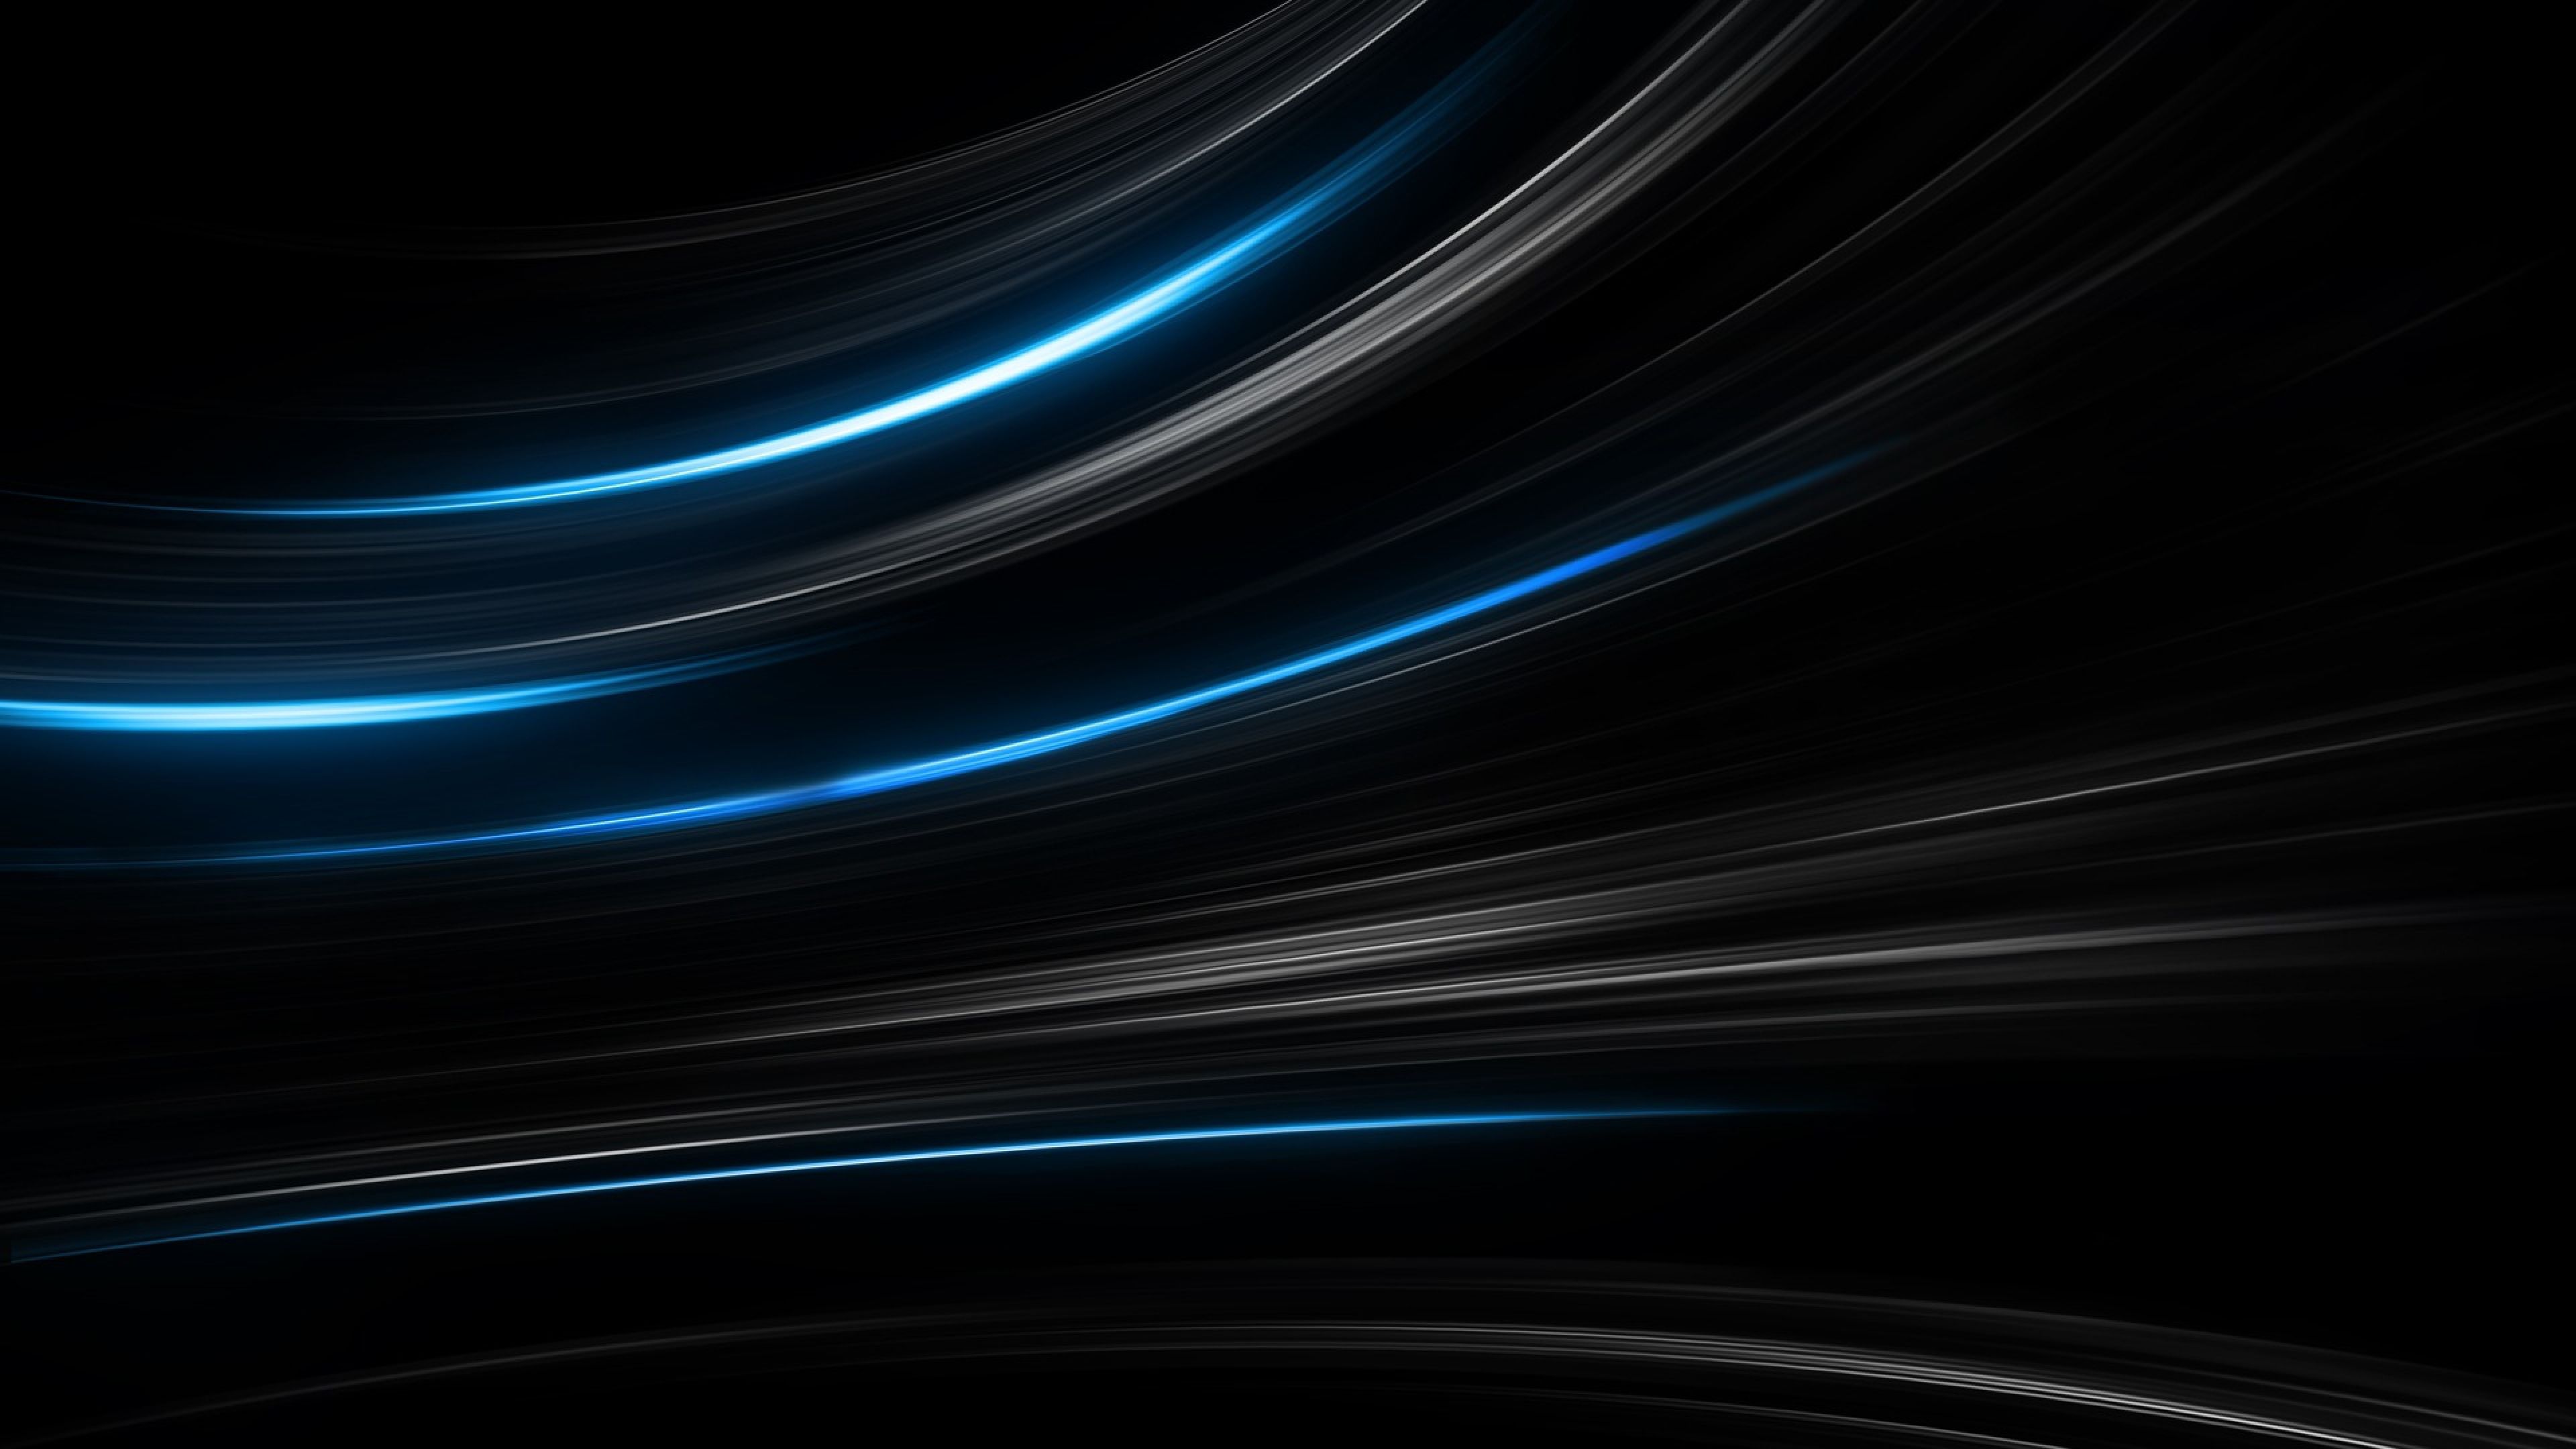 Black and Blue Abstract Wallpapers for PC 1227 - HD Wallpaper Site